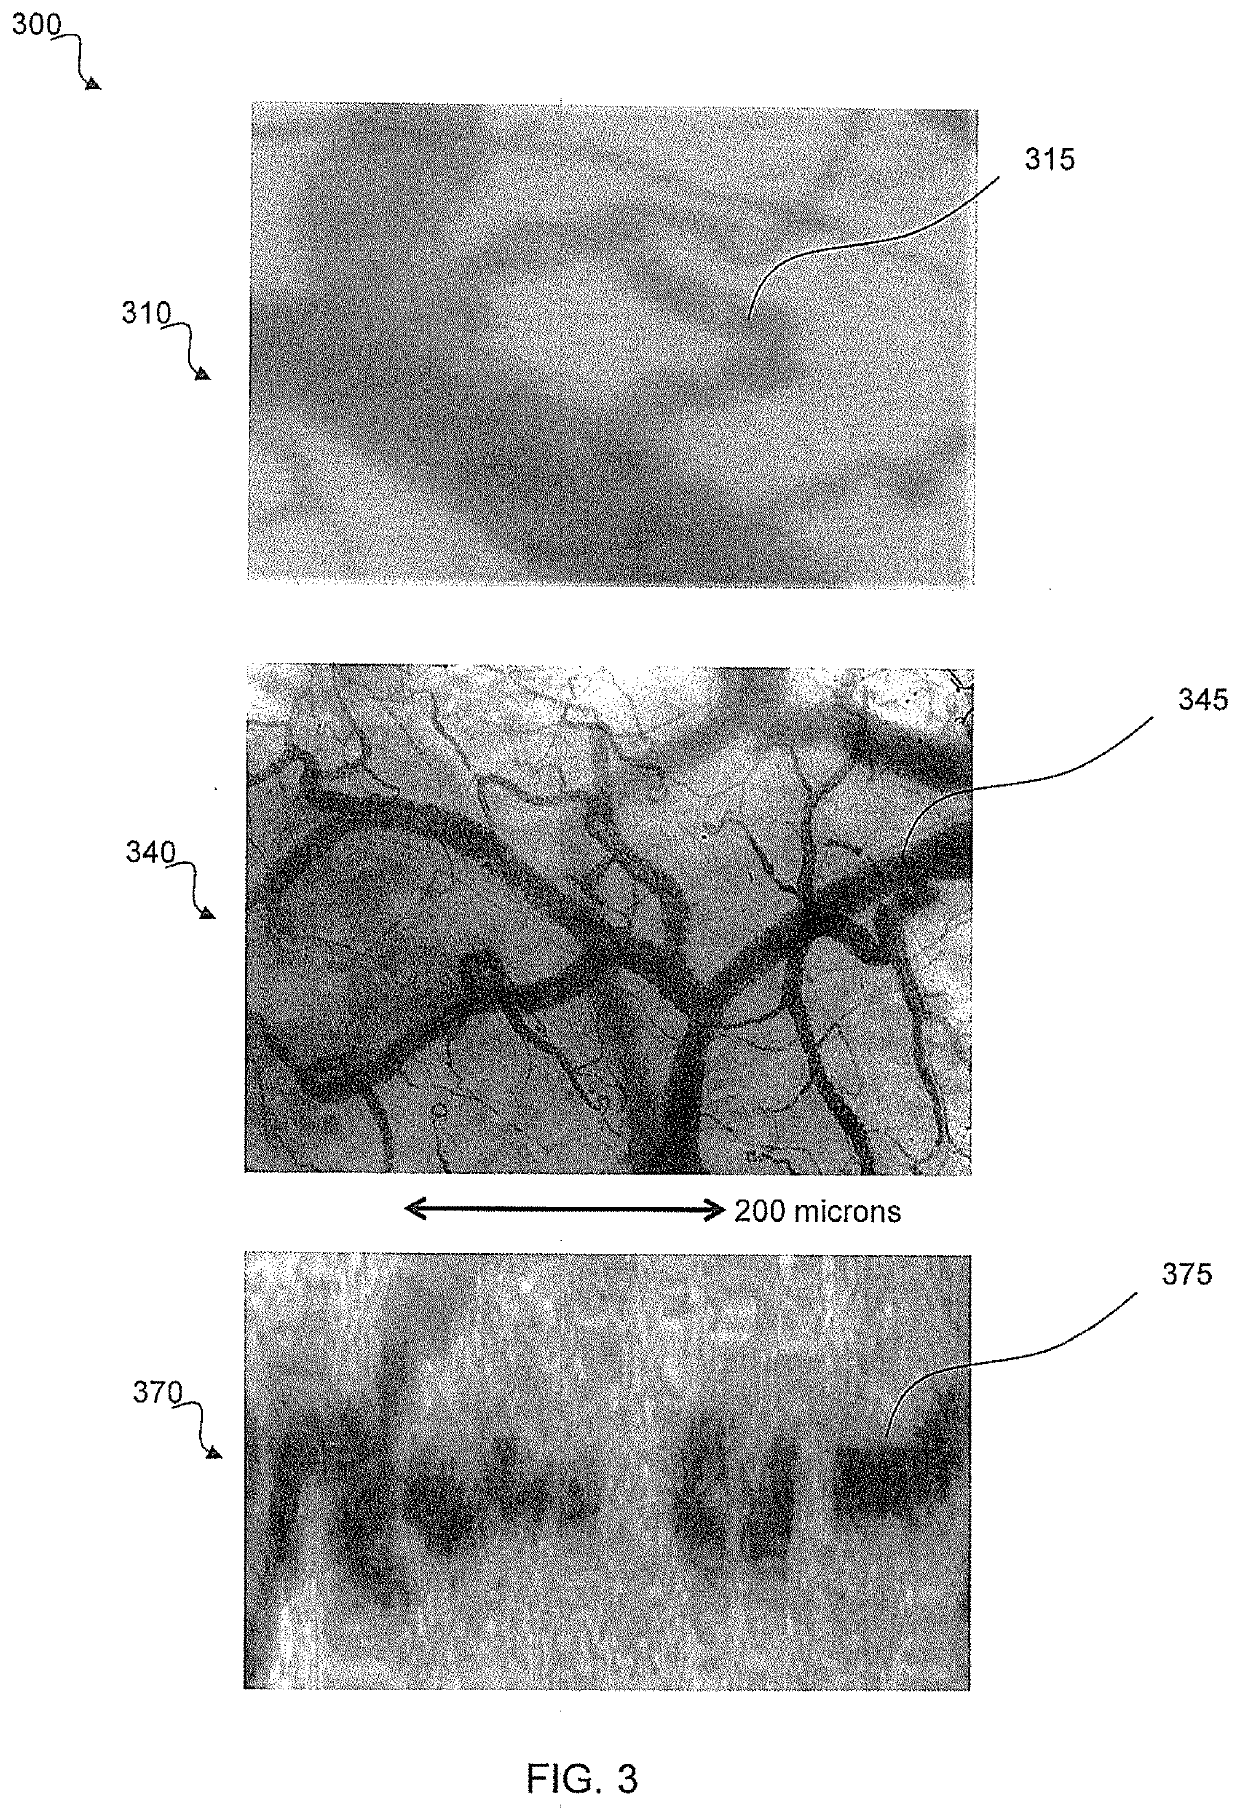 Method and apparatus for diagnostic analysis of the function and morphology of microcirculation alterations